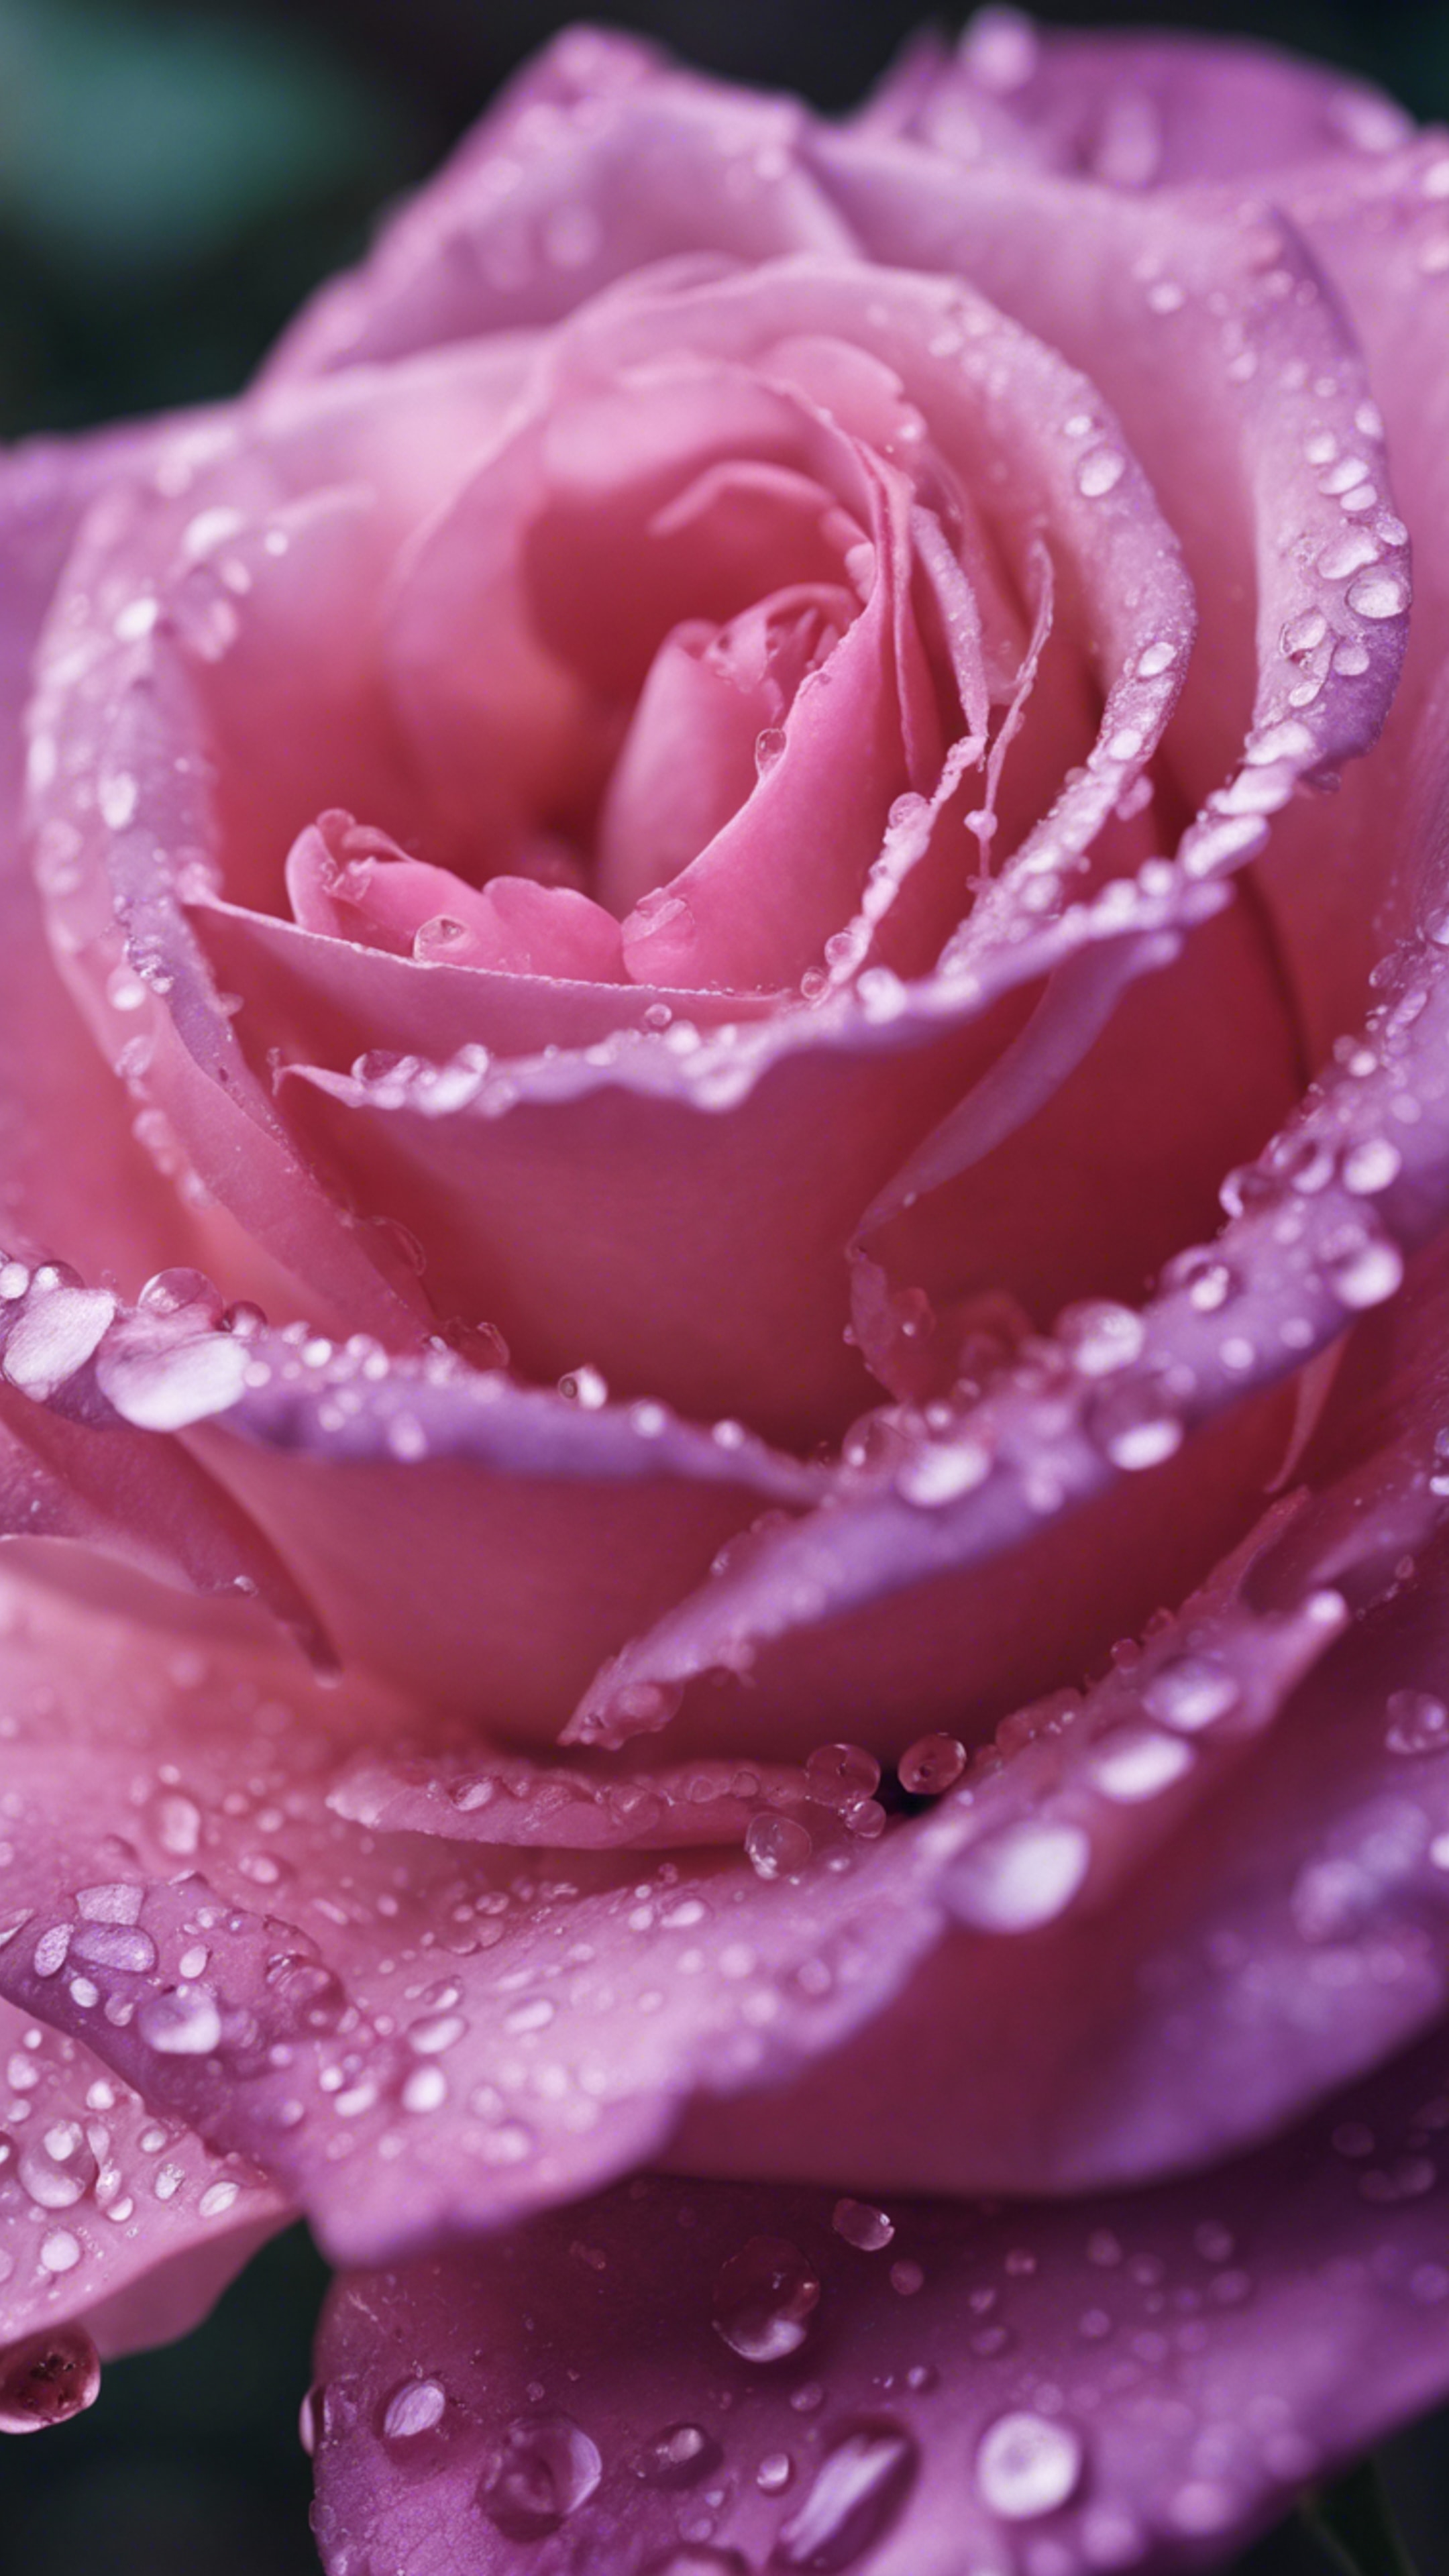 A close-up of a pink rose with purple dew drops. Wallpaper[b312cd8051dc4c1ebb06]